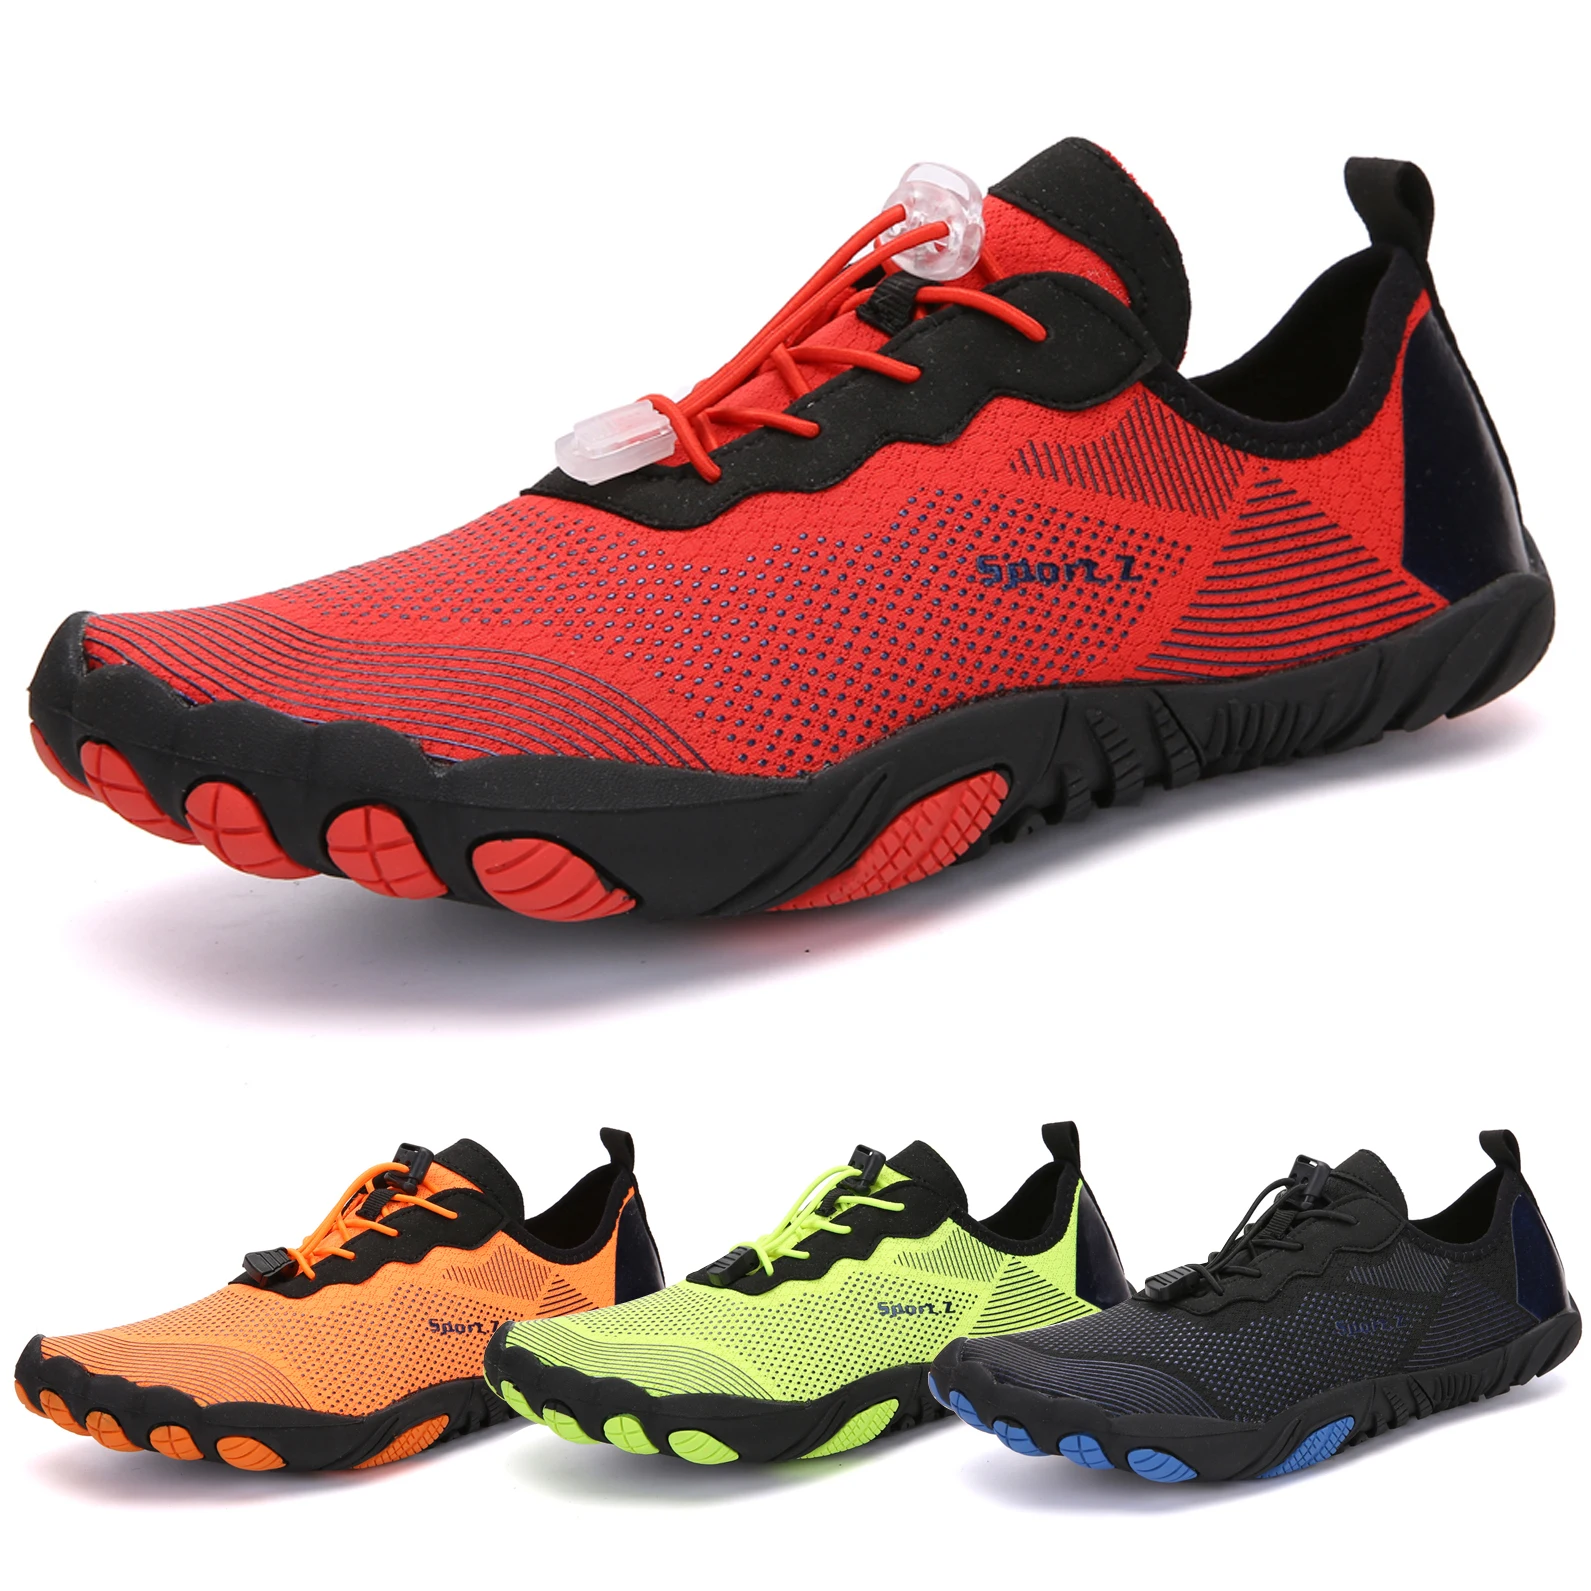 Men's beach swimming shoes Women's quick-drying water shoes Fitness sports shoes Couple wading shoes Color aqua shoes